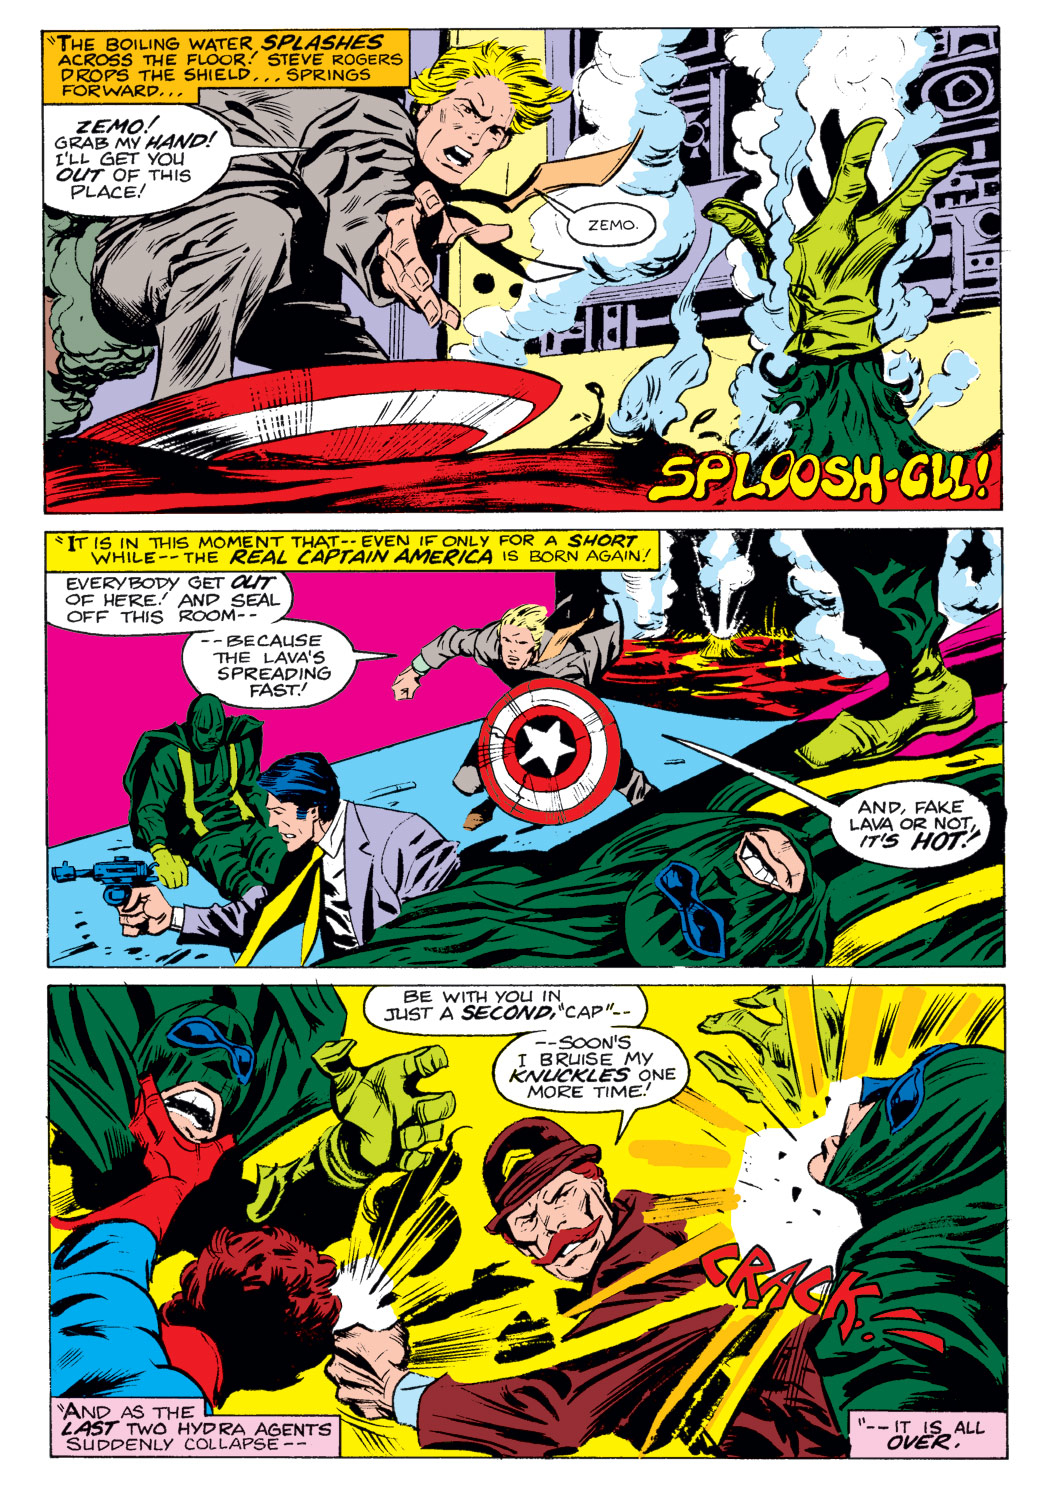 What If? (1977) issue 5 - Captain America hadn't vanished during World War Two - Page 29